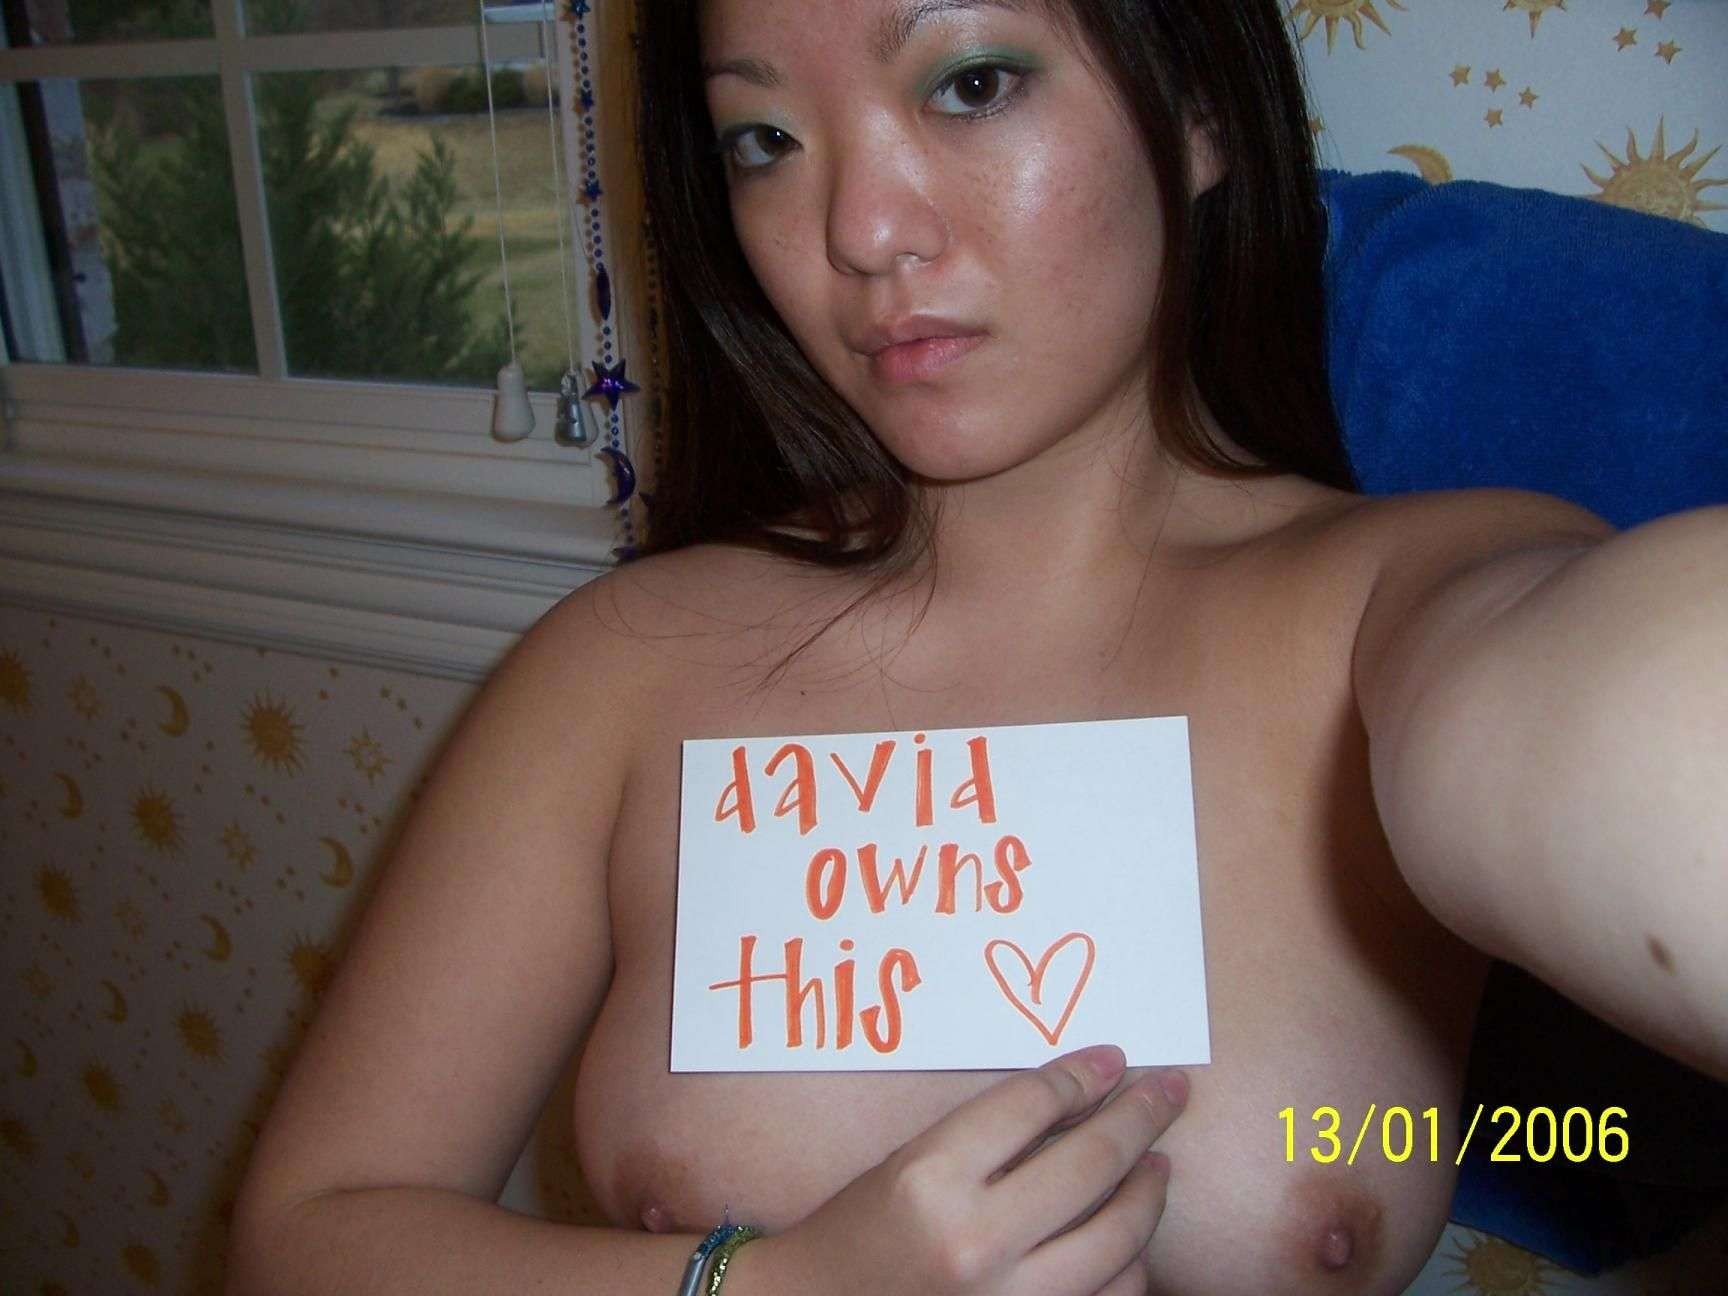 Girl posing and showing tits for Nate and David #69861847